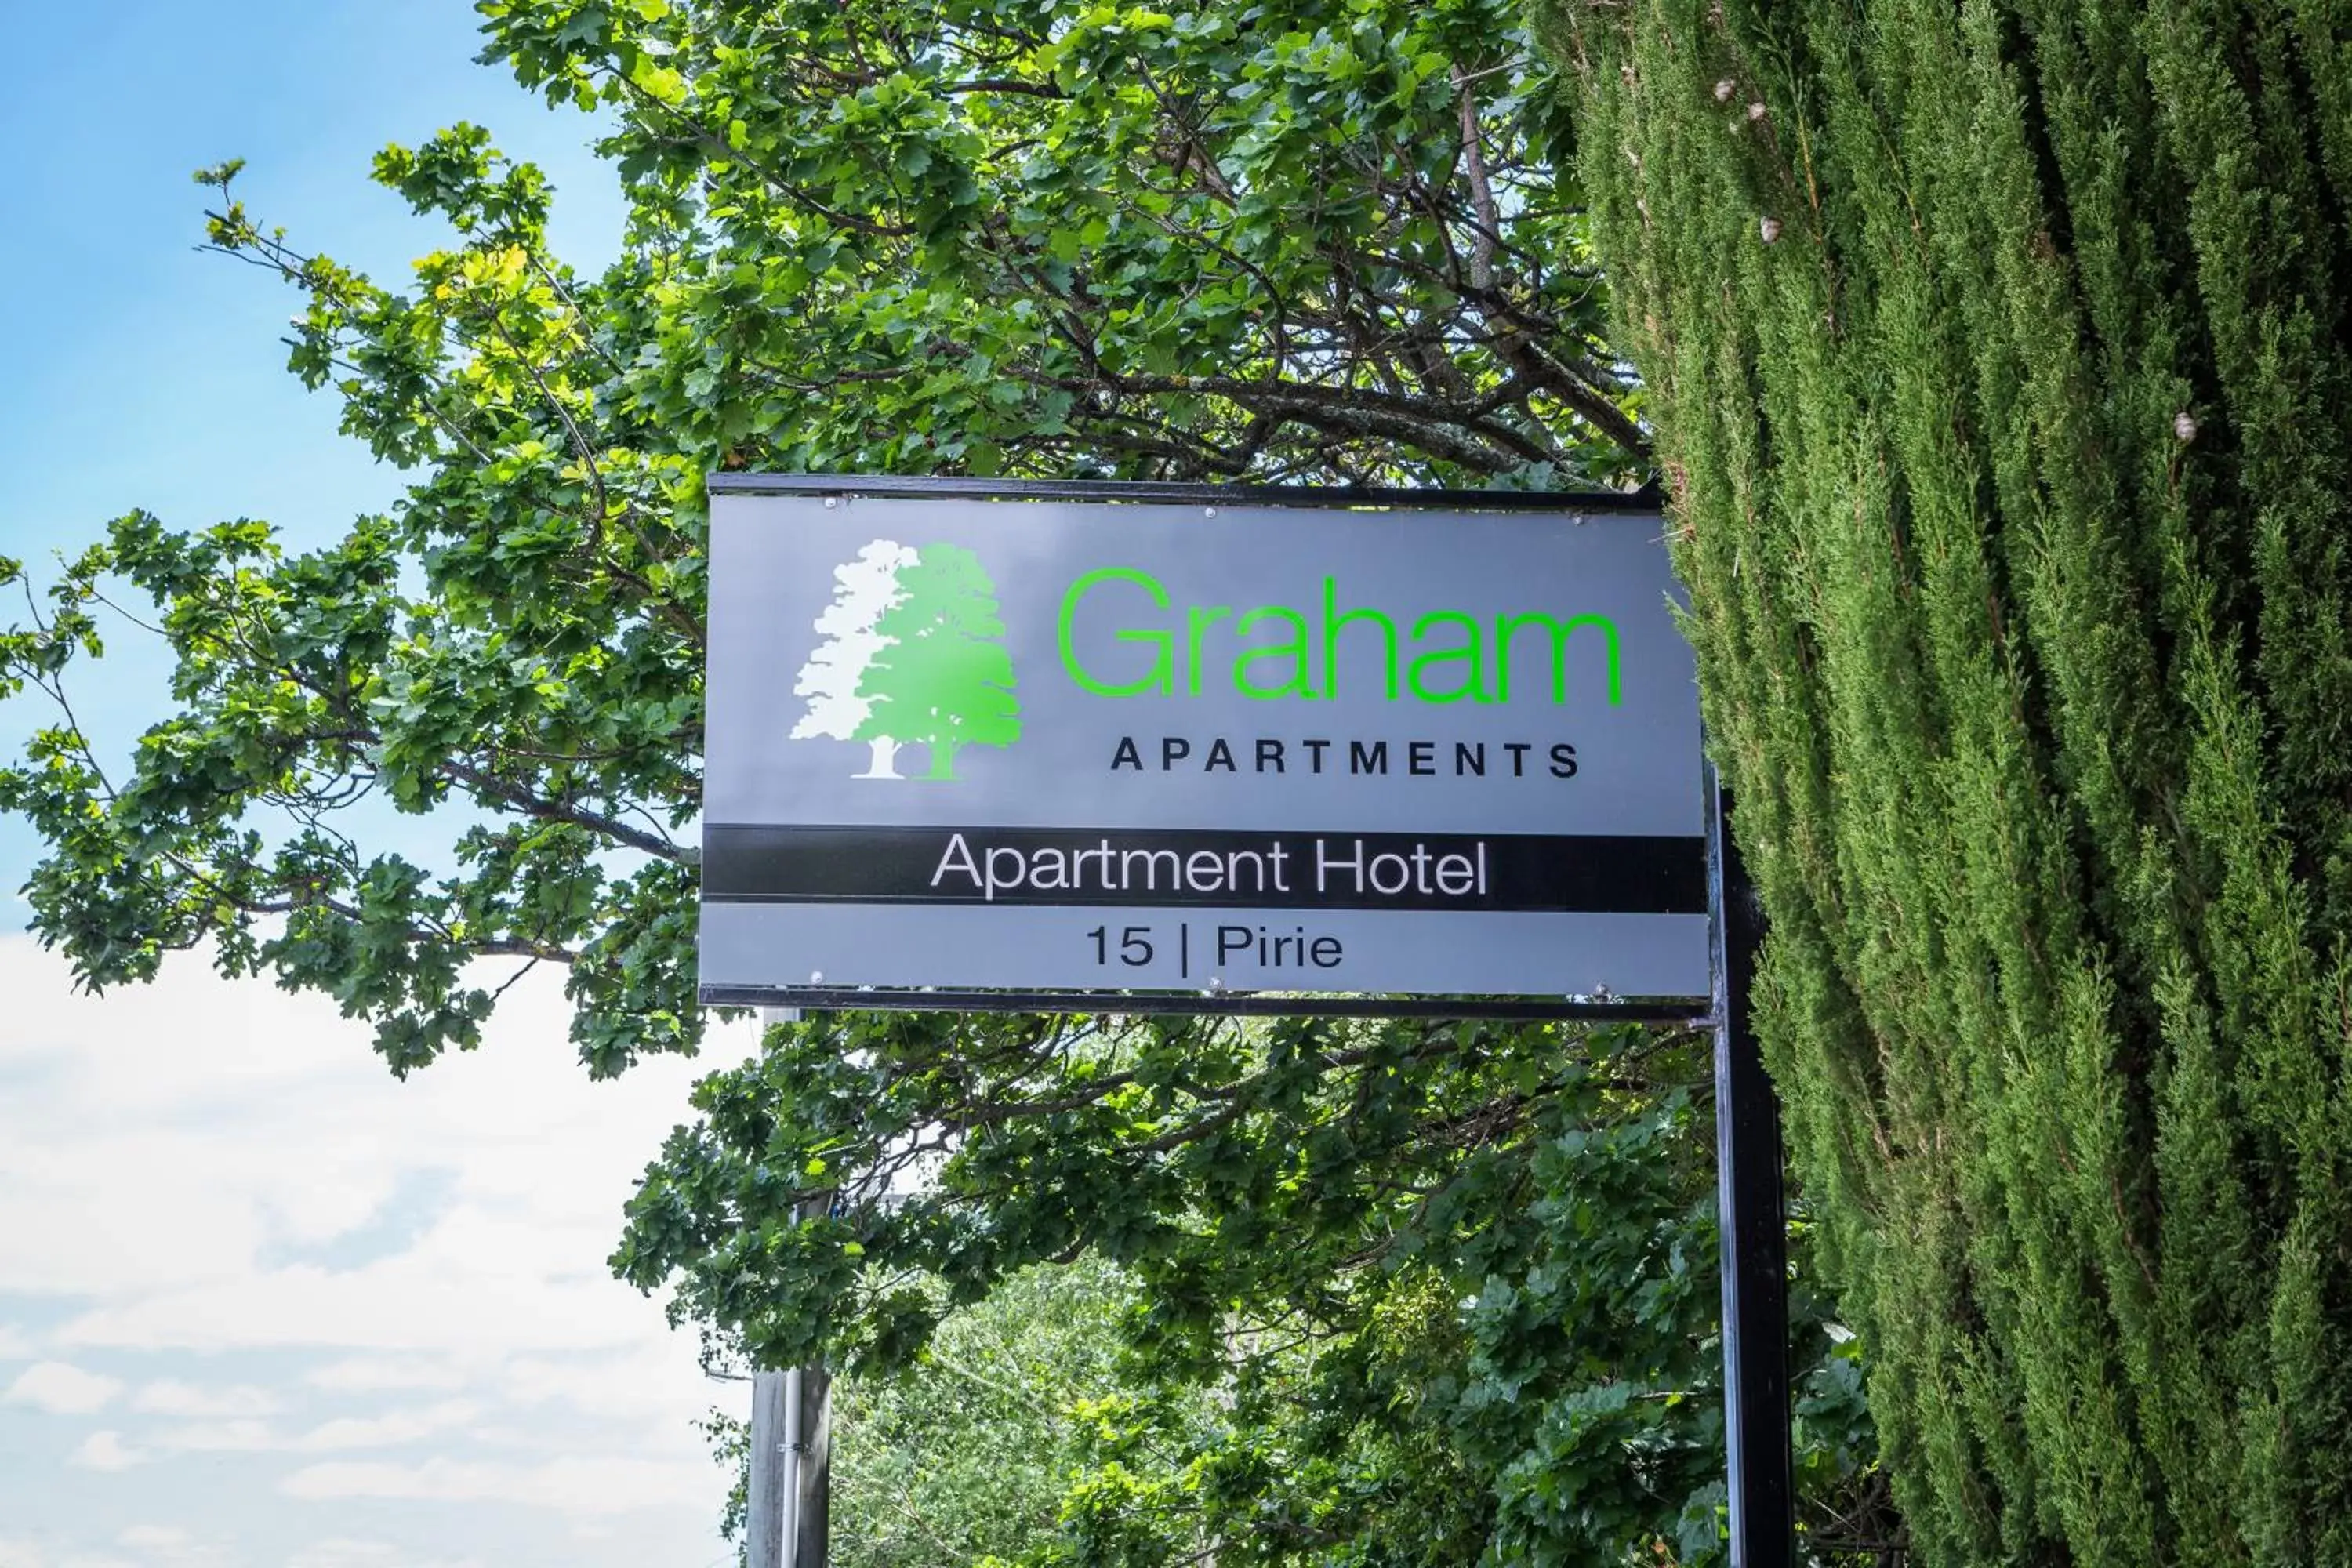 Property logo or sign in Graham Apartments